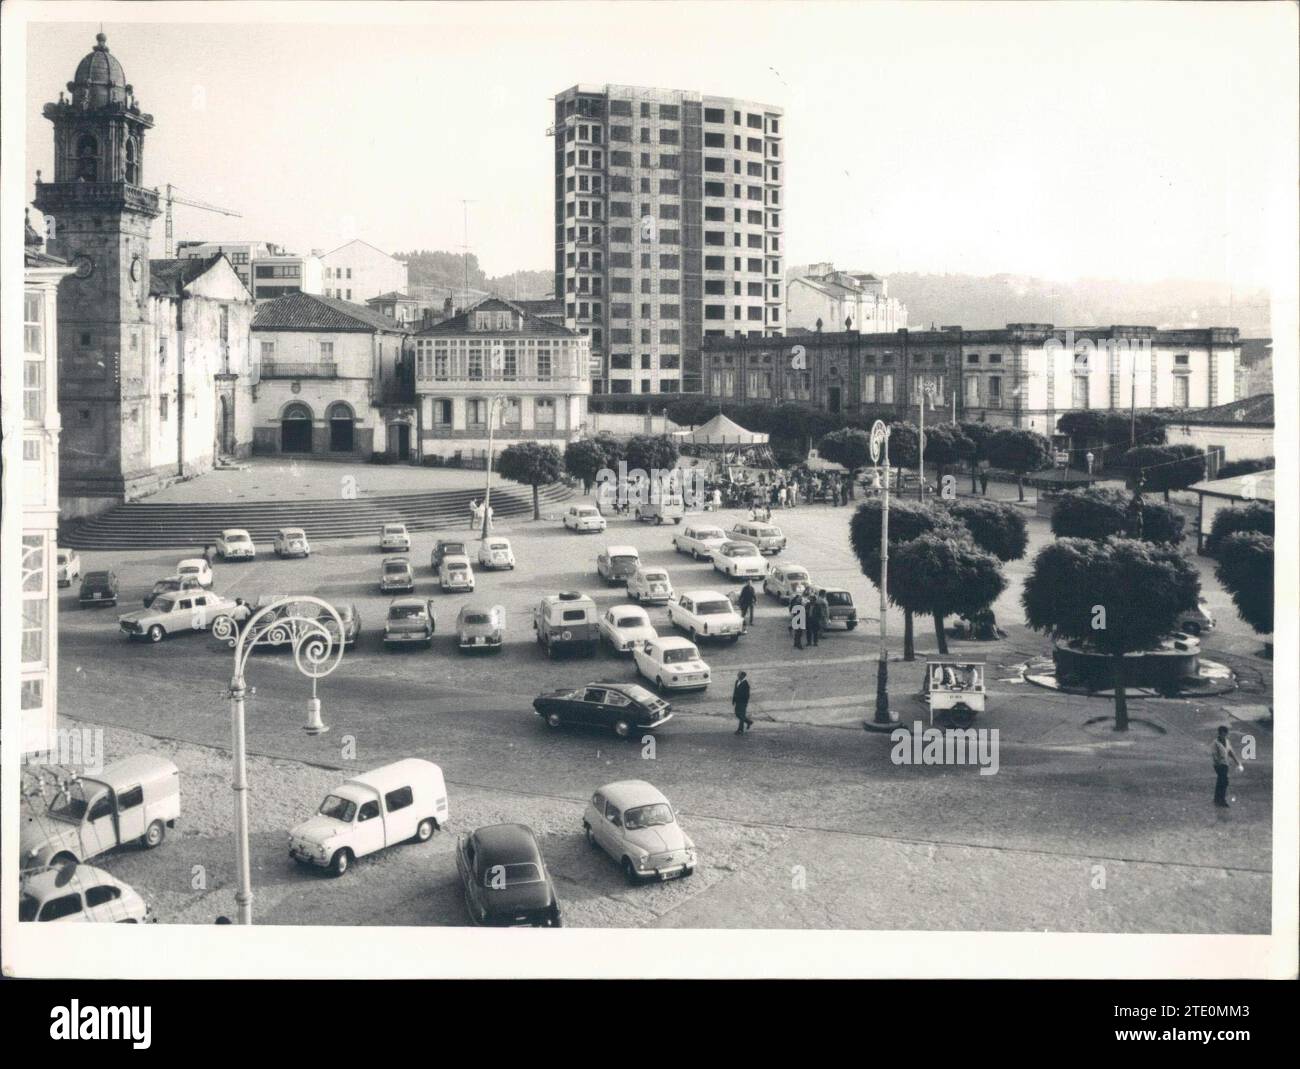 12/31/1967. Plaza del Campo Also known as the García Naveira Brothers. We see on the left, the Baroque tower (17th century) of Santo Domingo, on the right, the neoclassical style palace built in the 18th century and whose function was to archive the kingdom of Galicia. The urban center is provided with three Gothic Churches with Romanesque features: Santiago, San Francisco and Santa María del Azogue. Next to these, the convent of Agustinas Recoletas (17th century), the Town Hall (18th century) designed by Ventura Rodríguez, the Huérfanas school. Credit: Album / Archivo ABC / Foto Blanco Stock Photo